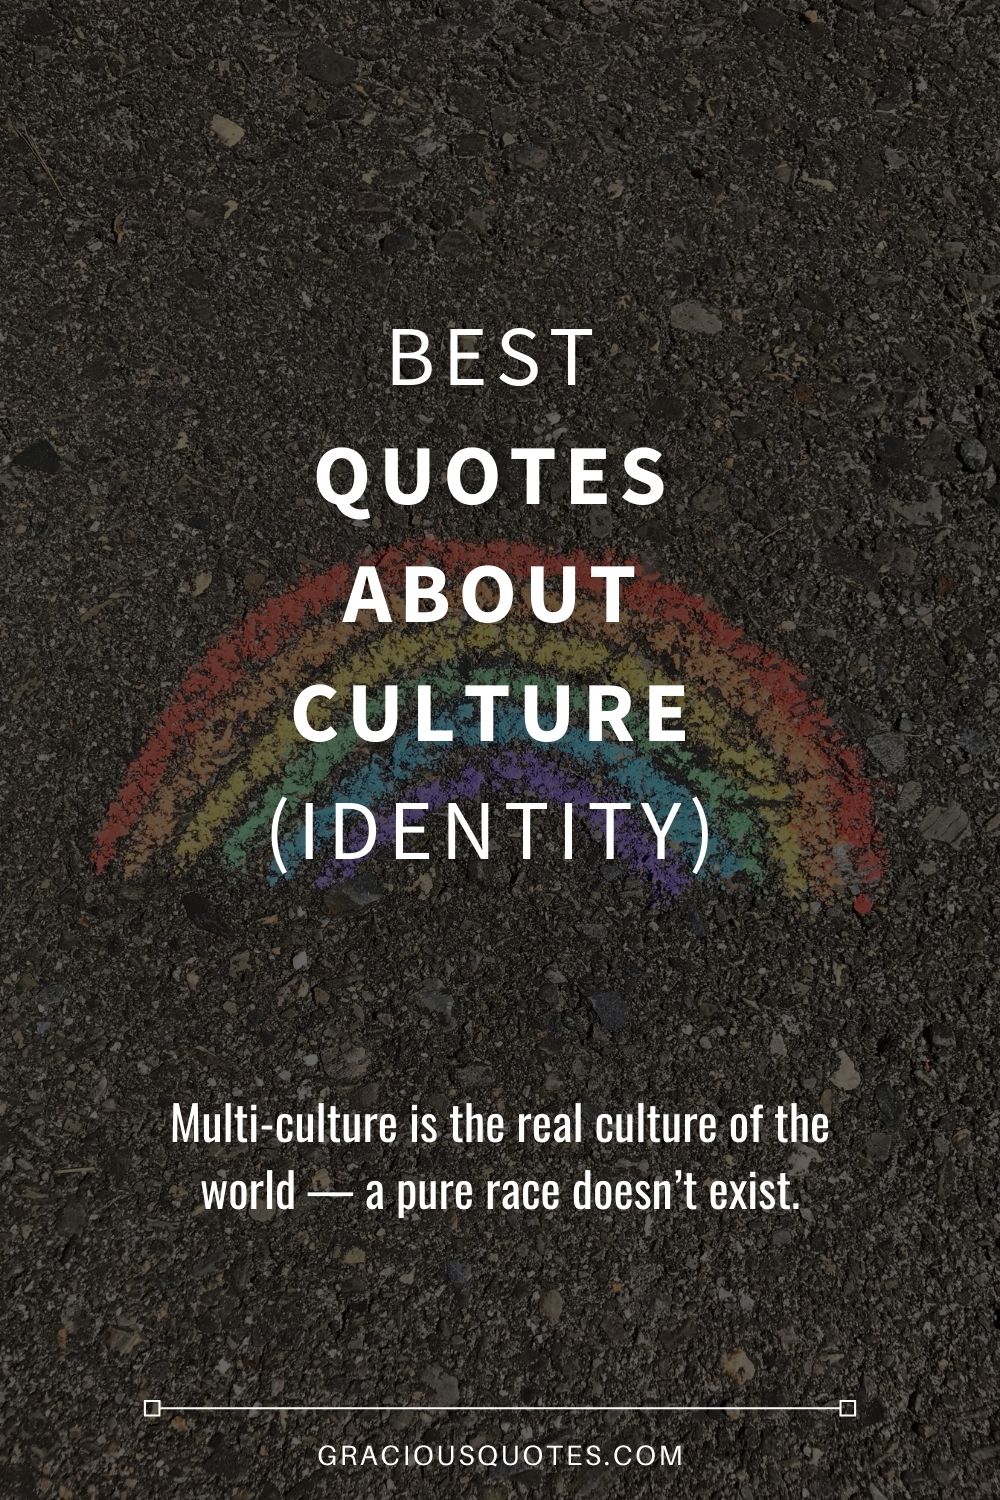 Best Quotes About Culture (IDENTITY) - Gracious Quotes